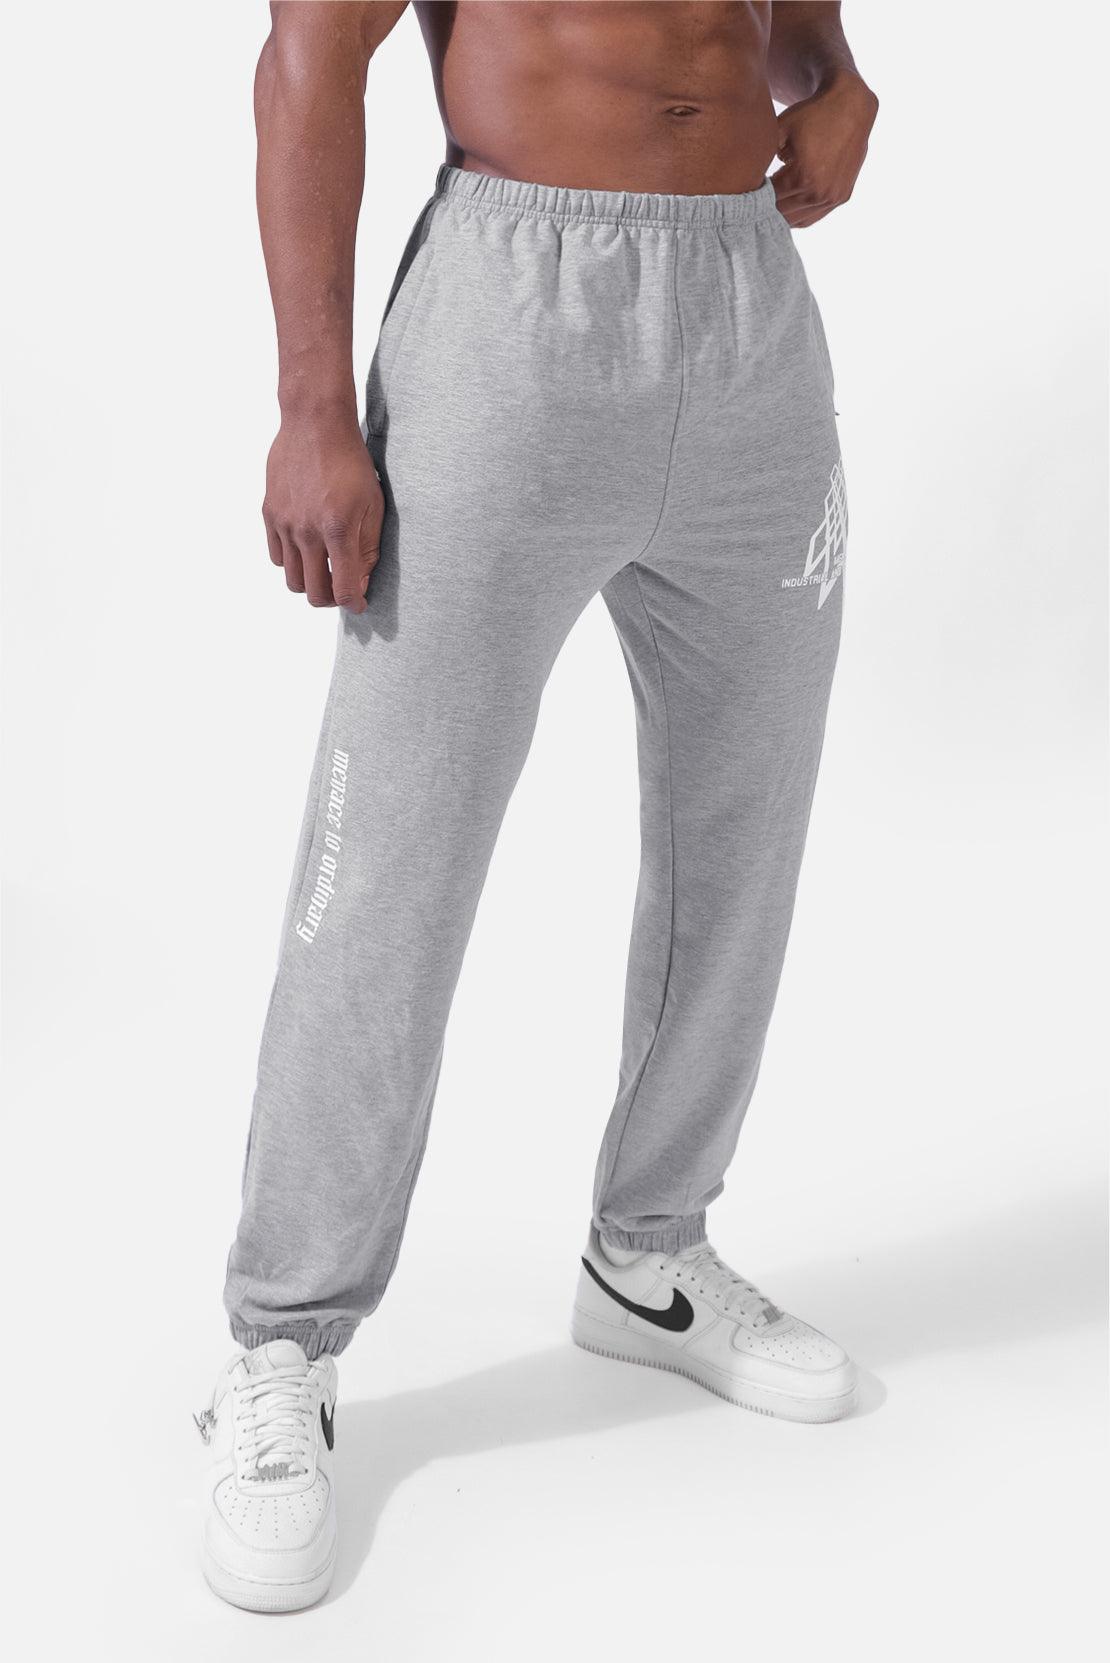 Rest Day Relaxed Fit Joggers - Light Gray